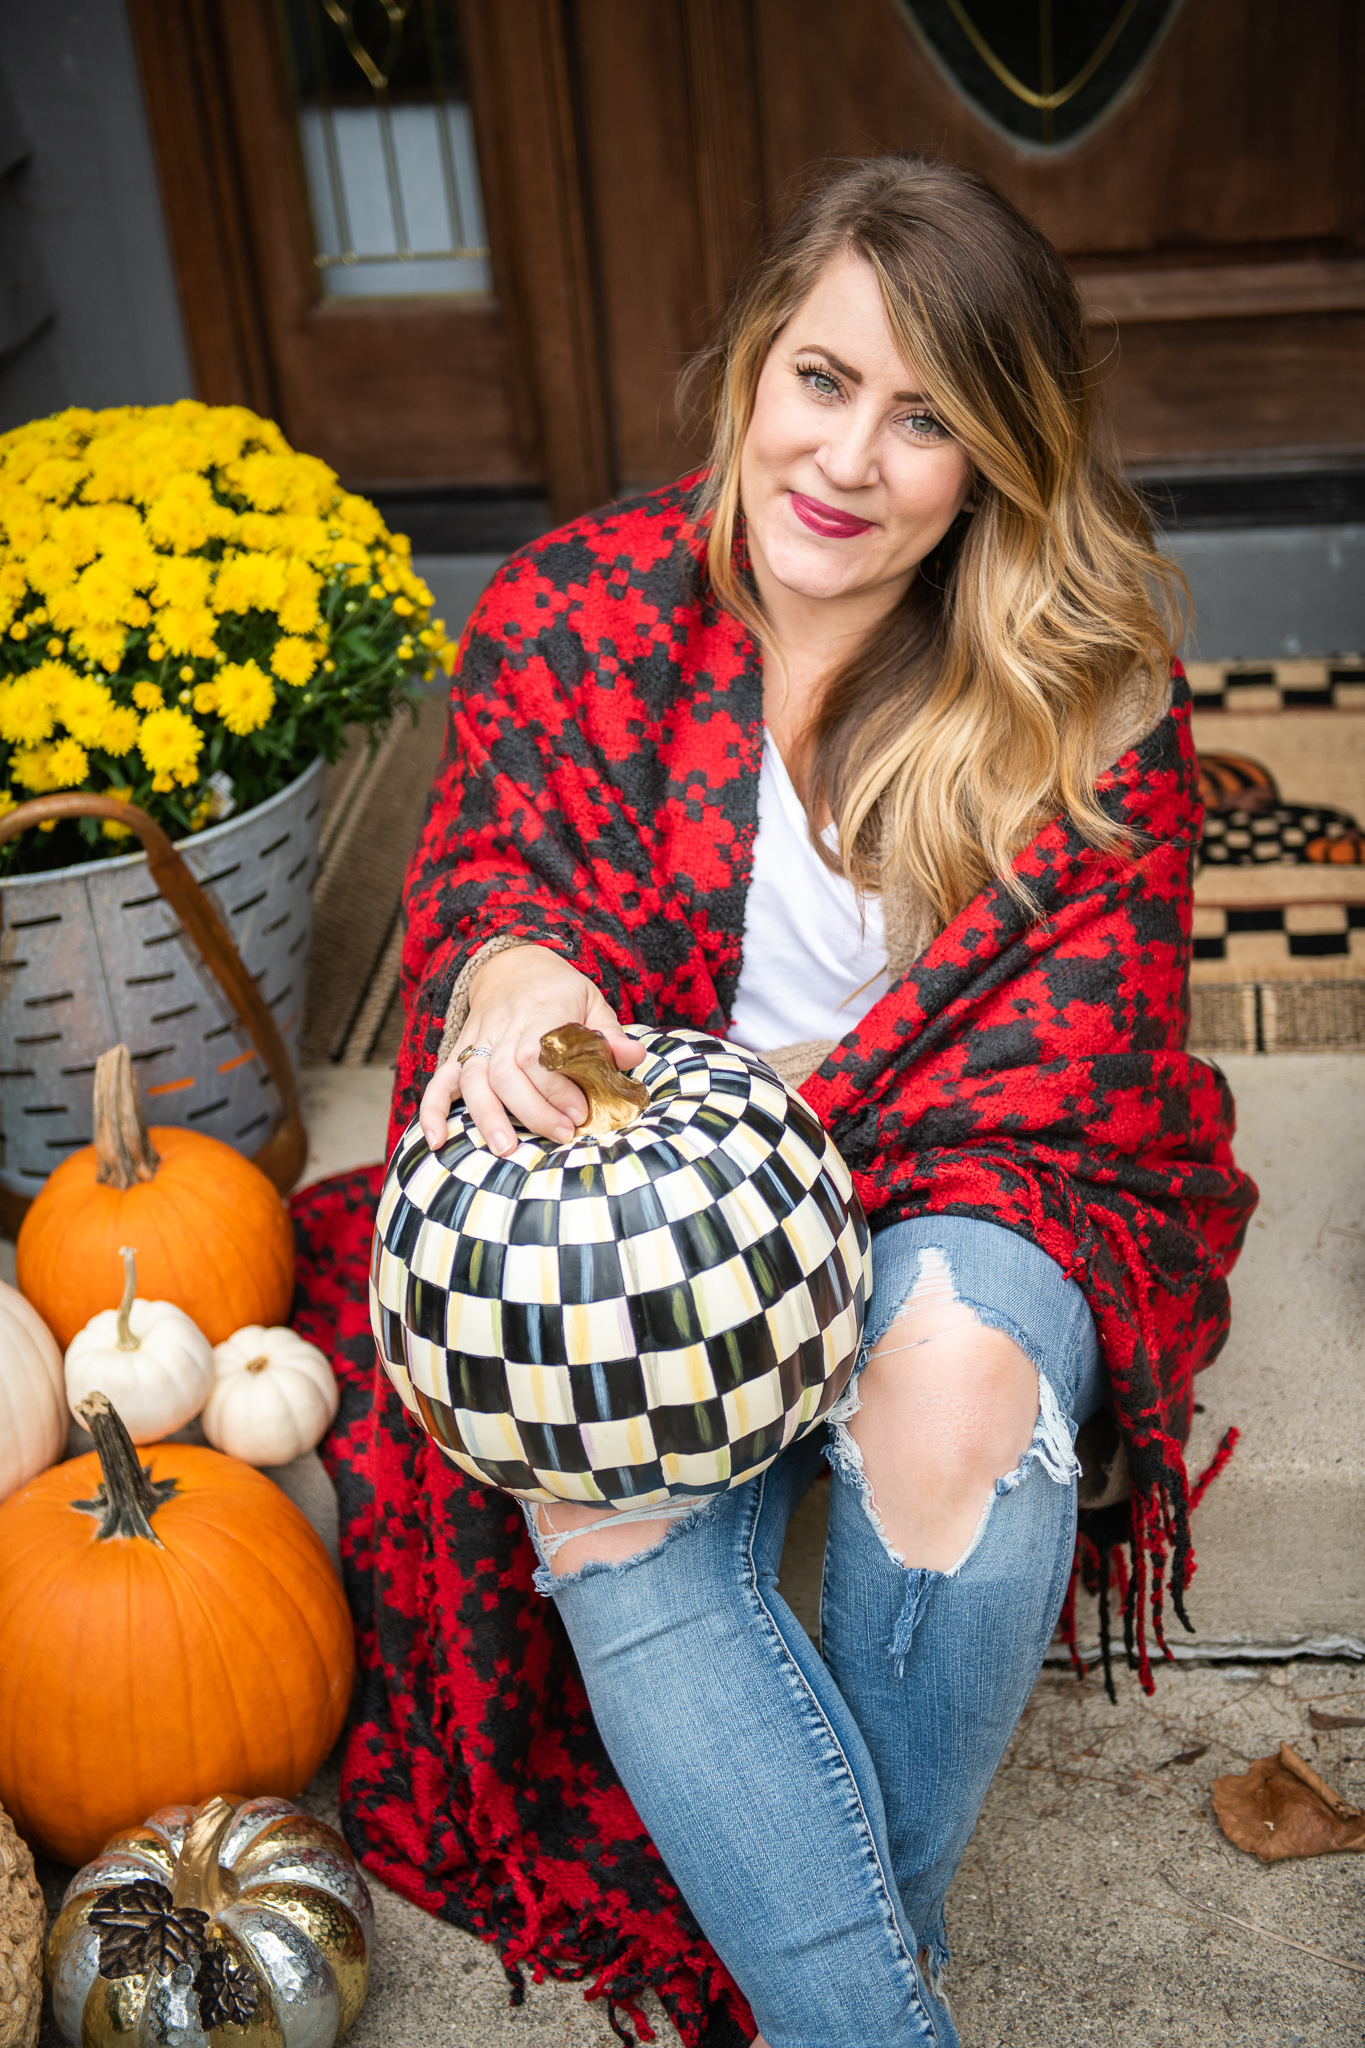 Super Cute Fall Front Porch Ideas featured by top Ohio lifestyle blog Coffee Beans and Bobby Pins